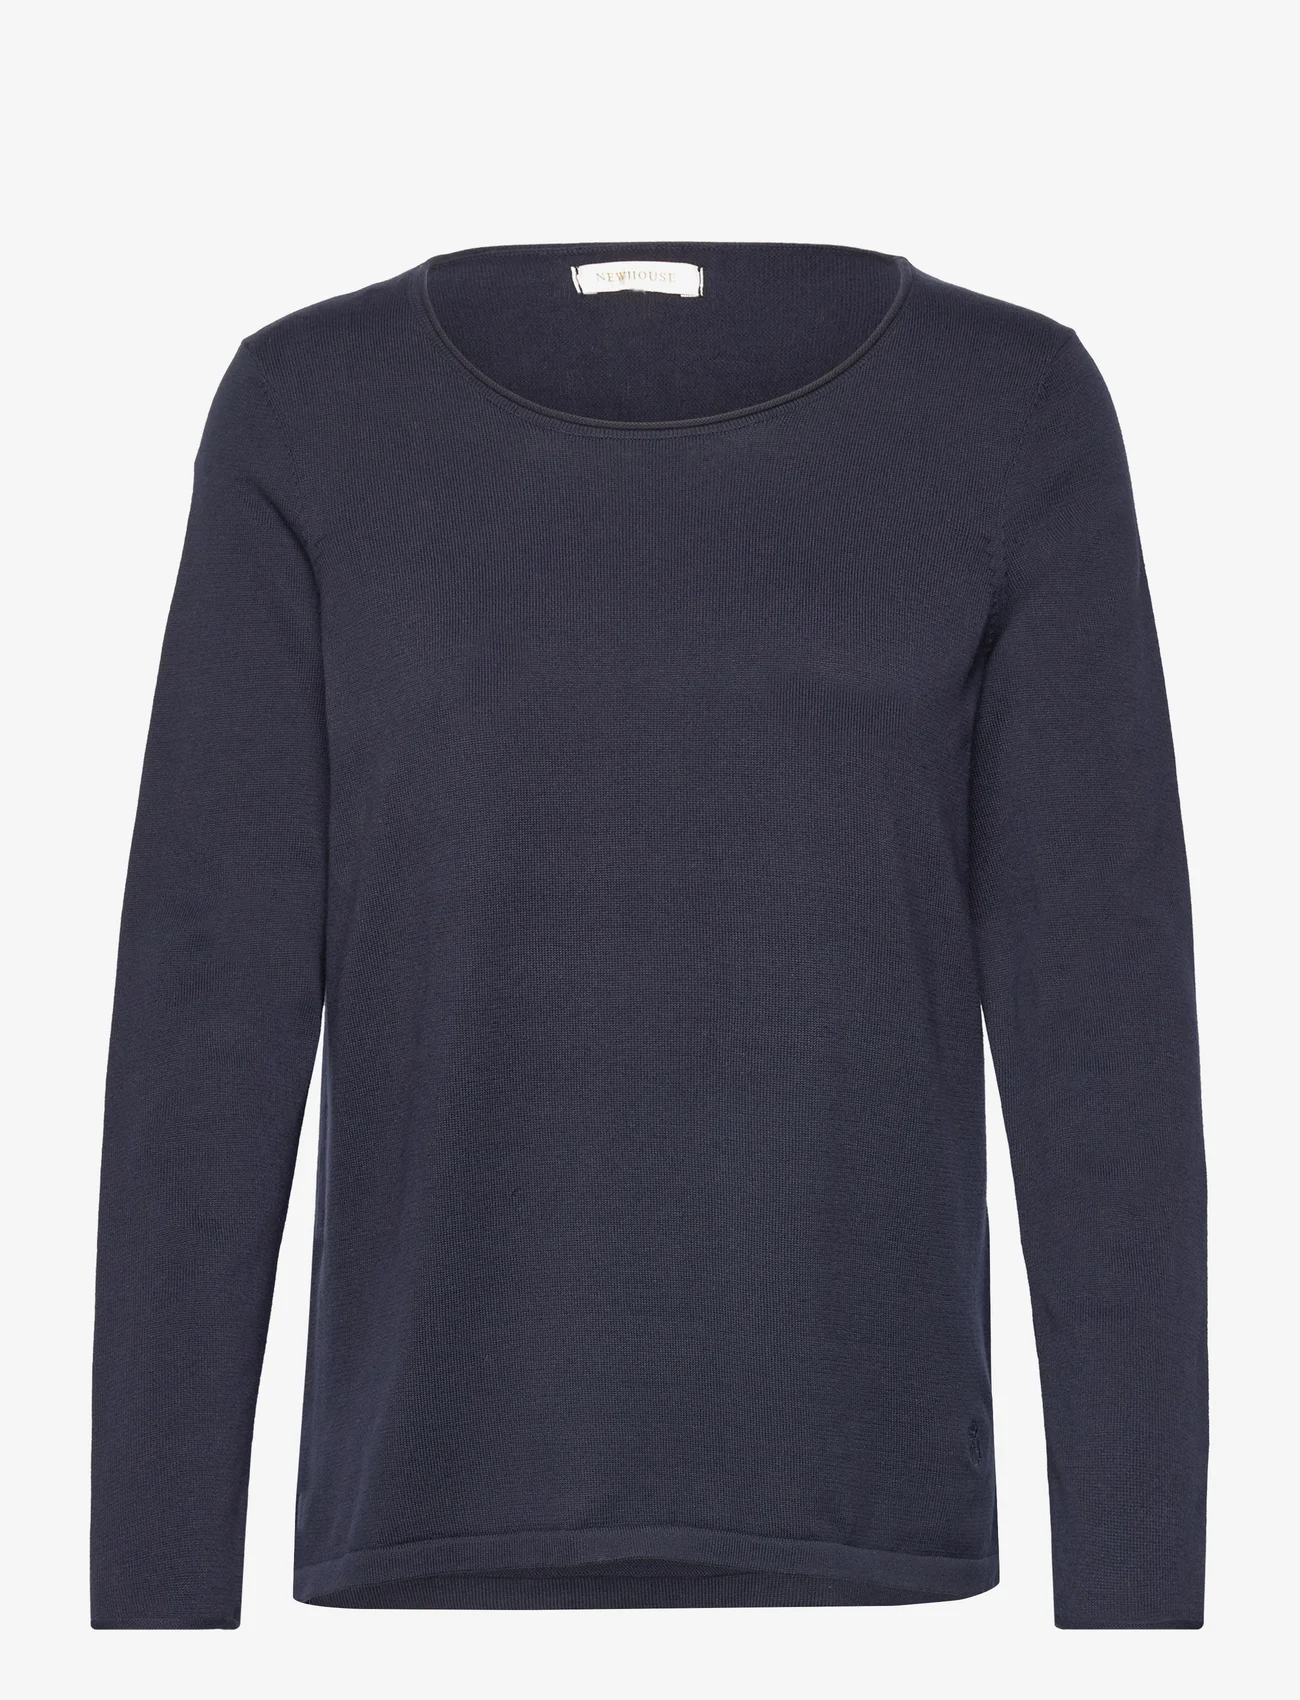 Newhouse - Ebba Sweater - swetry - navy - 0